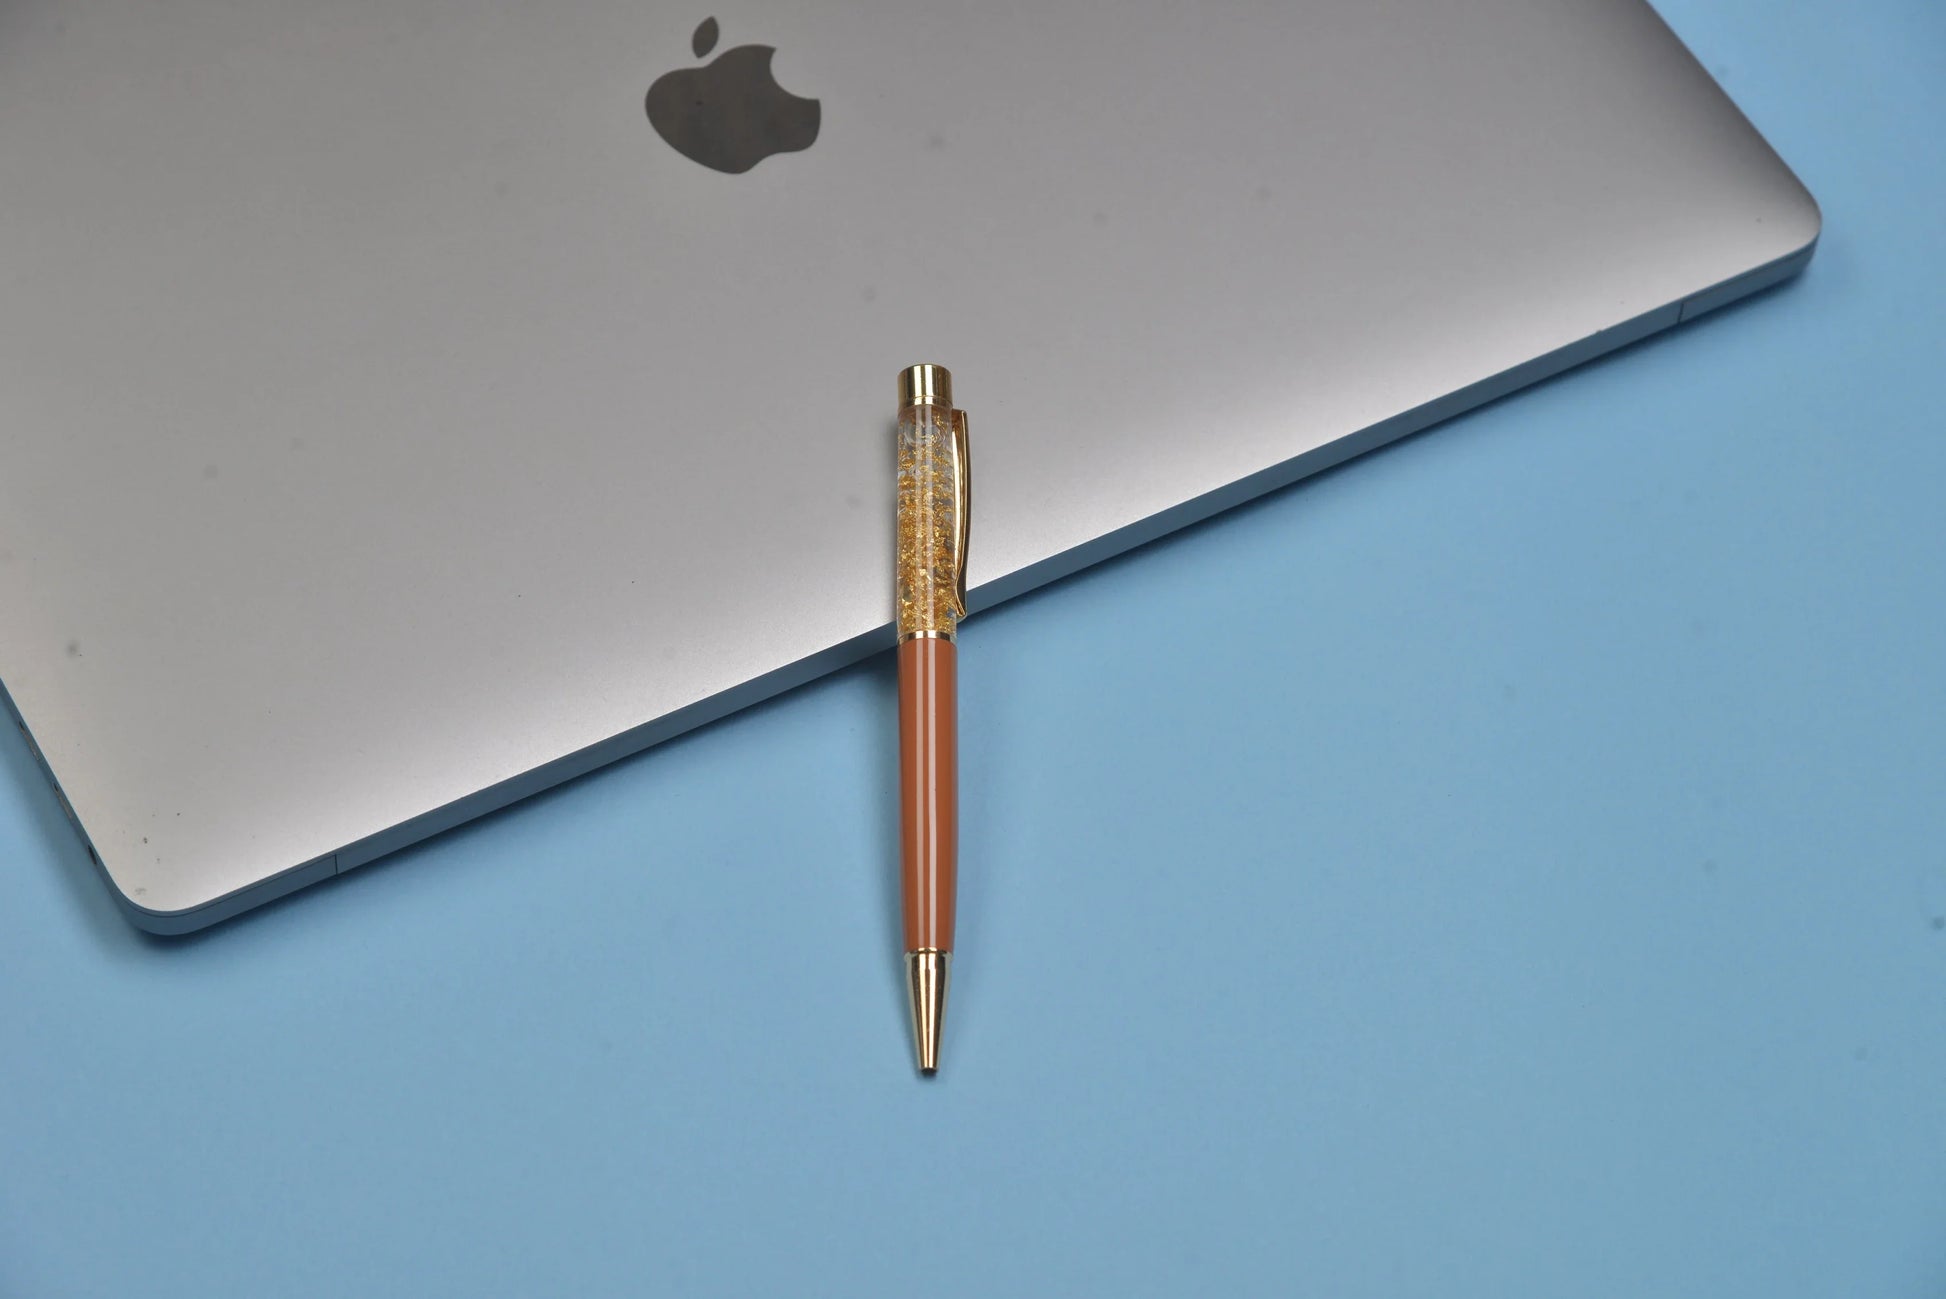 Don't miss out the personalized pen which makes the best corporate gift with its sleek and stylish finish